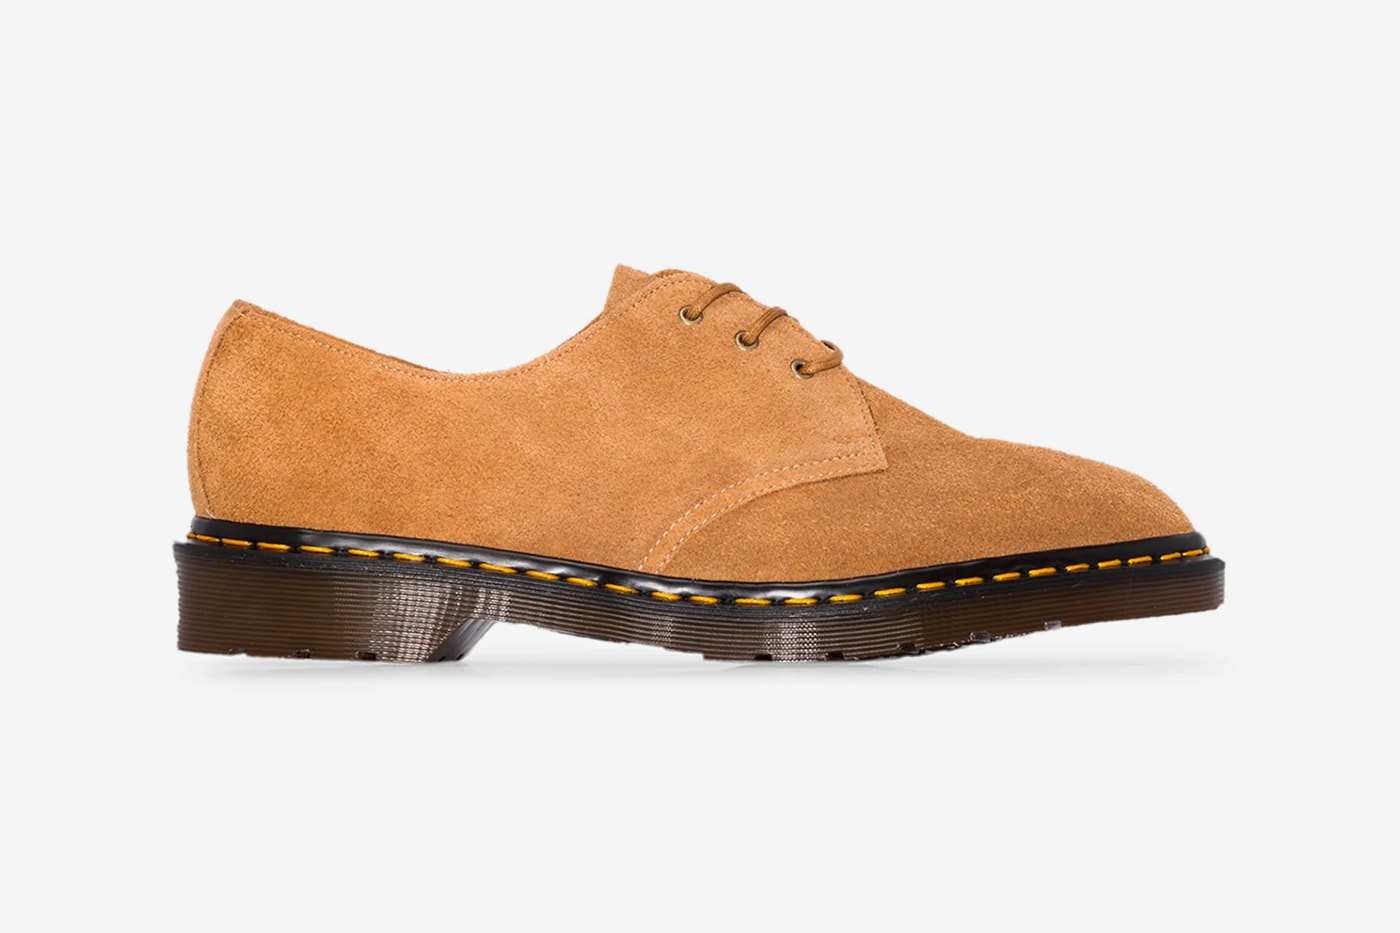 Dr Martens 1461 Des Oasis Suede Derby Shoes the Smiths Archive Leather menswear streetwear footwear spring summer 2020 collection united kingdom rock bands british england liam gallagher morrisey